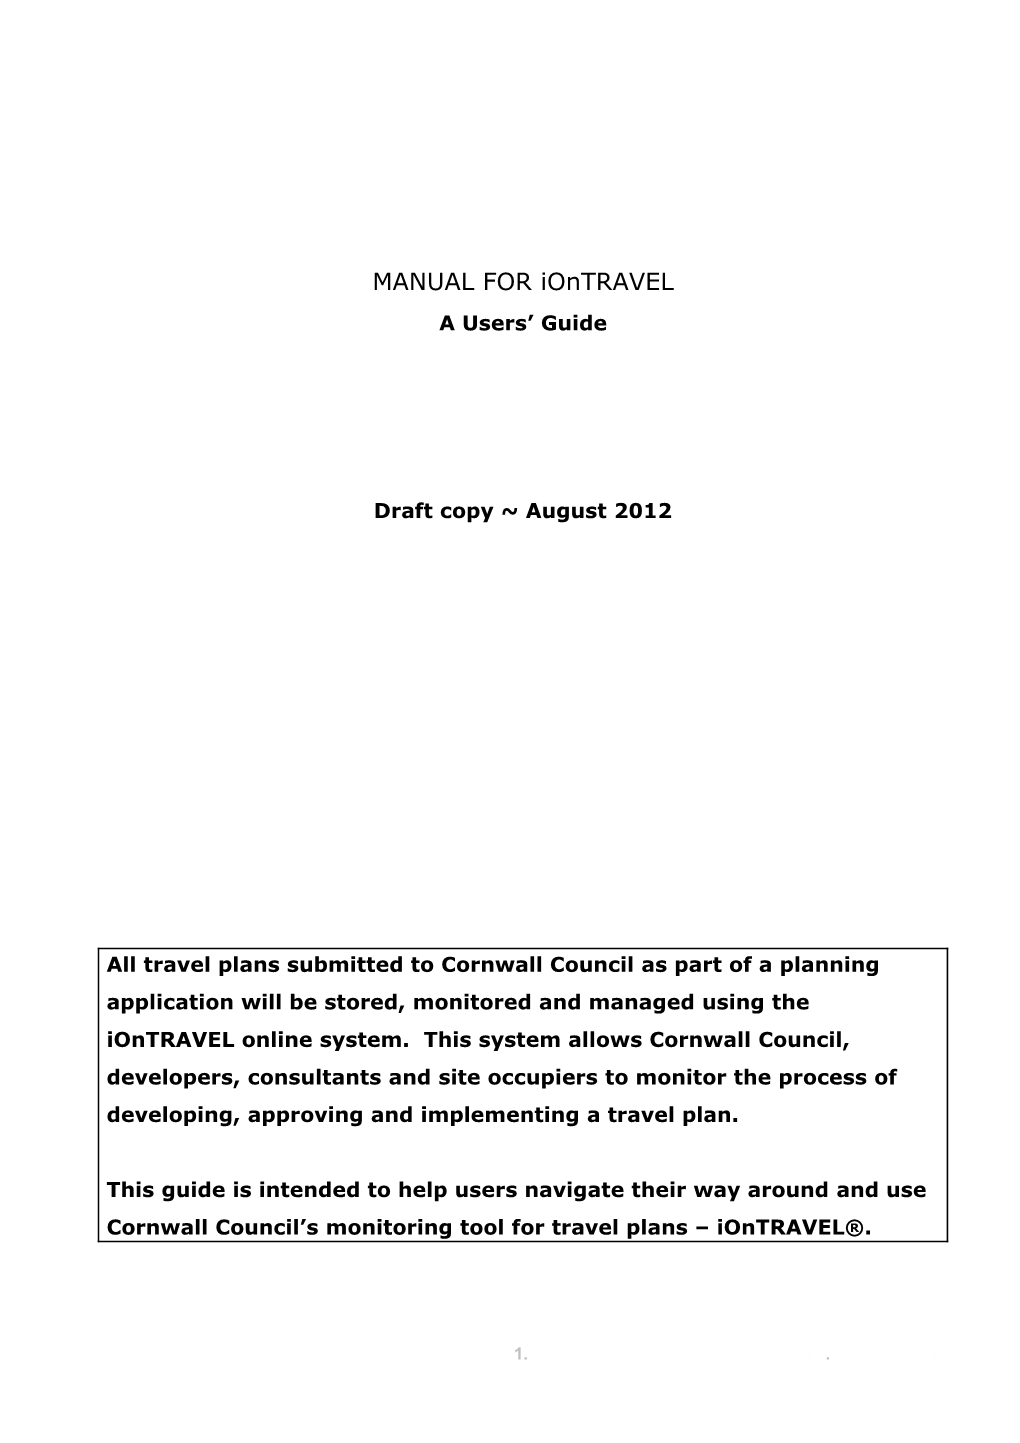 MANUAL for Iontravel